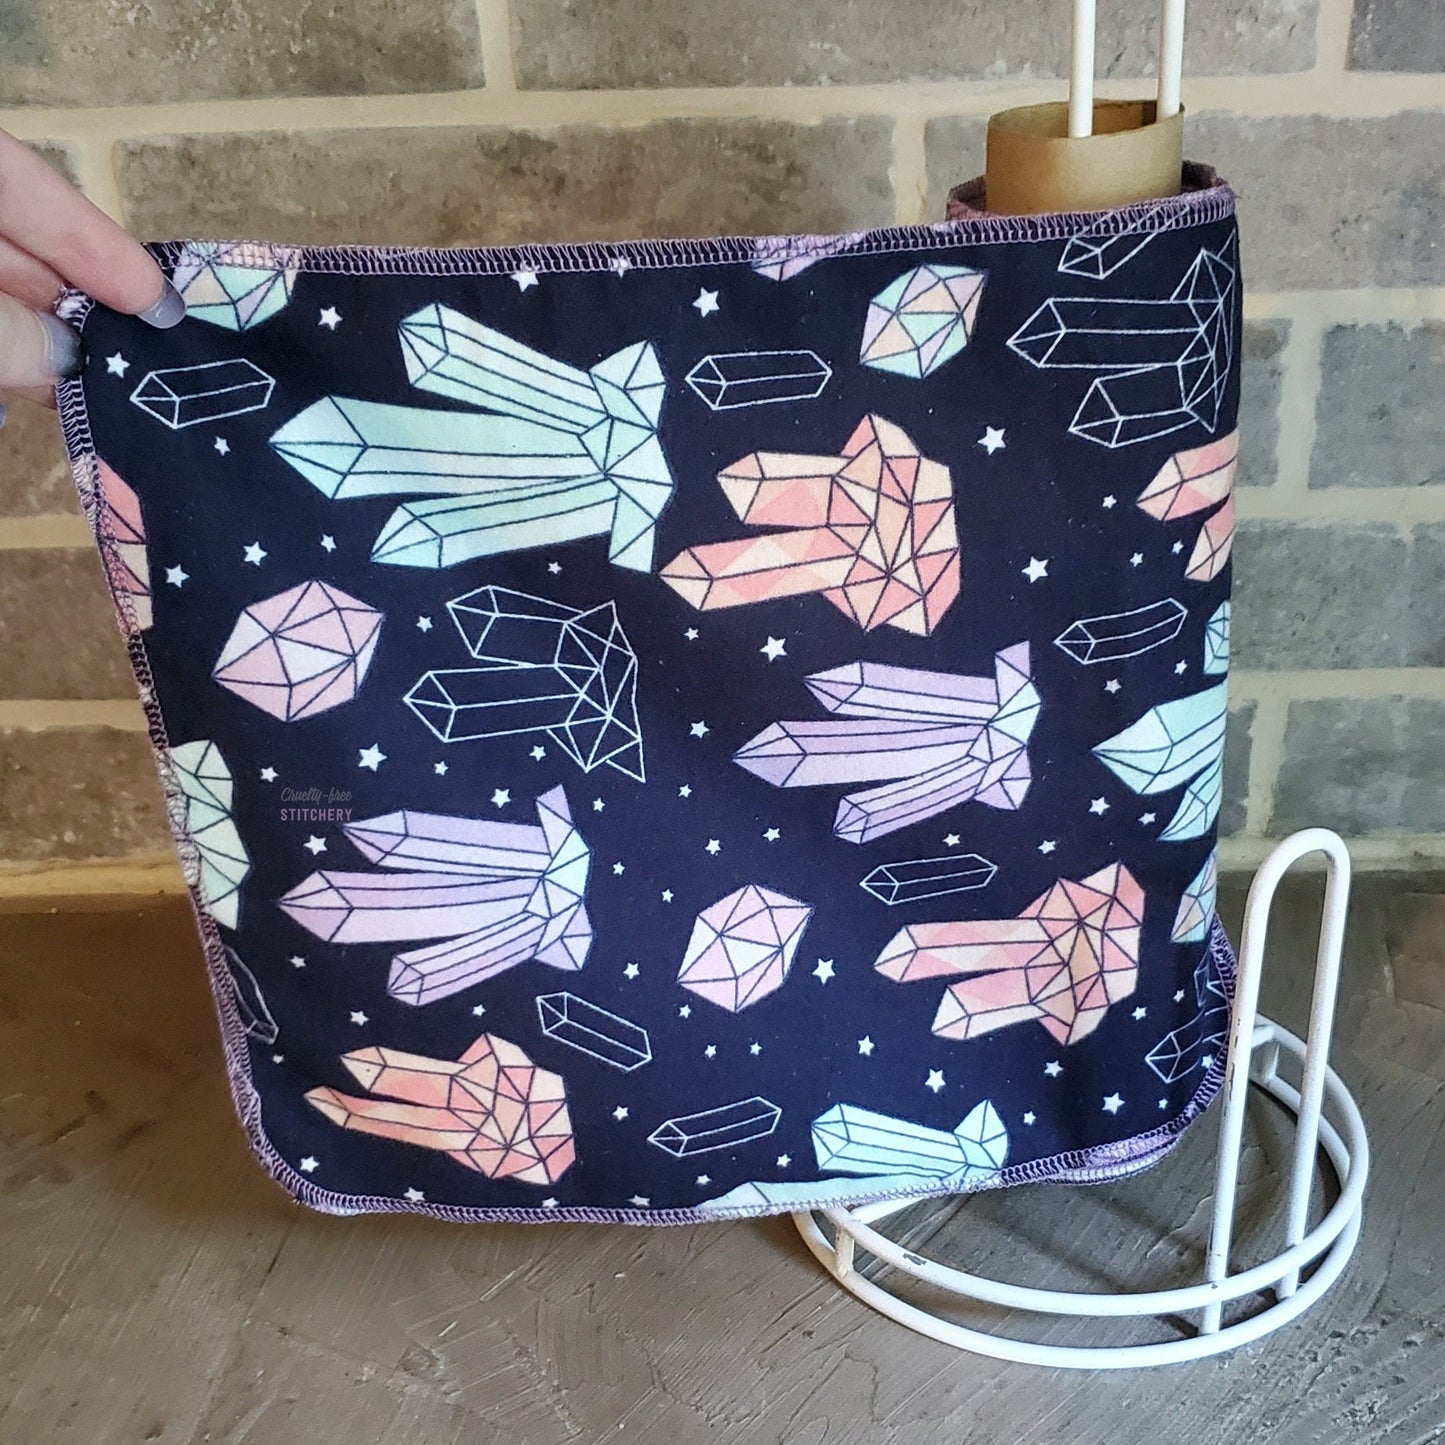 A roll of crystal print NonPaper Towels. The fabric is dark navy blue with drawn pink, purple, and light blue crystals and tiny white stars.